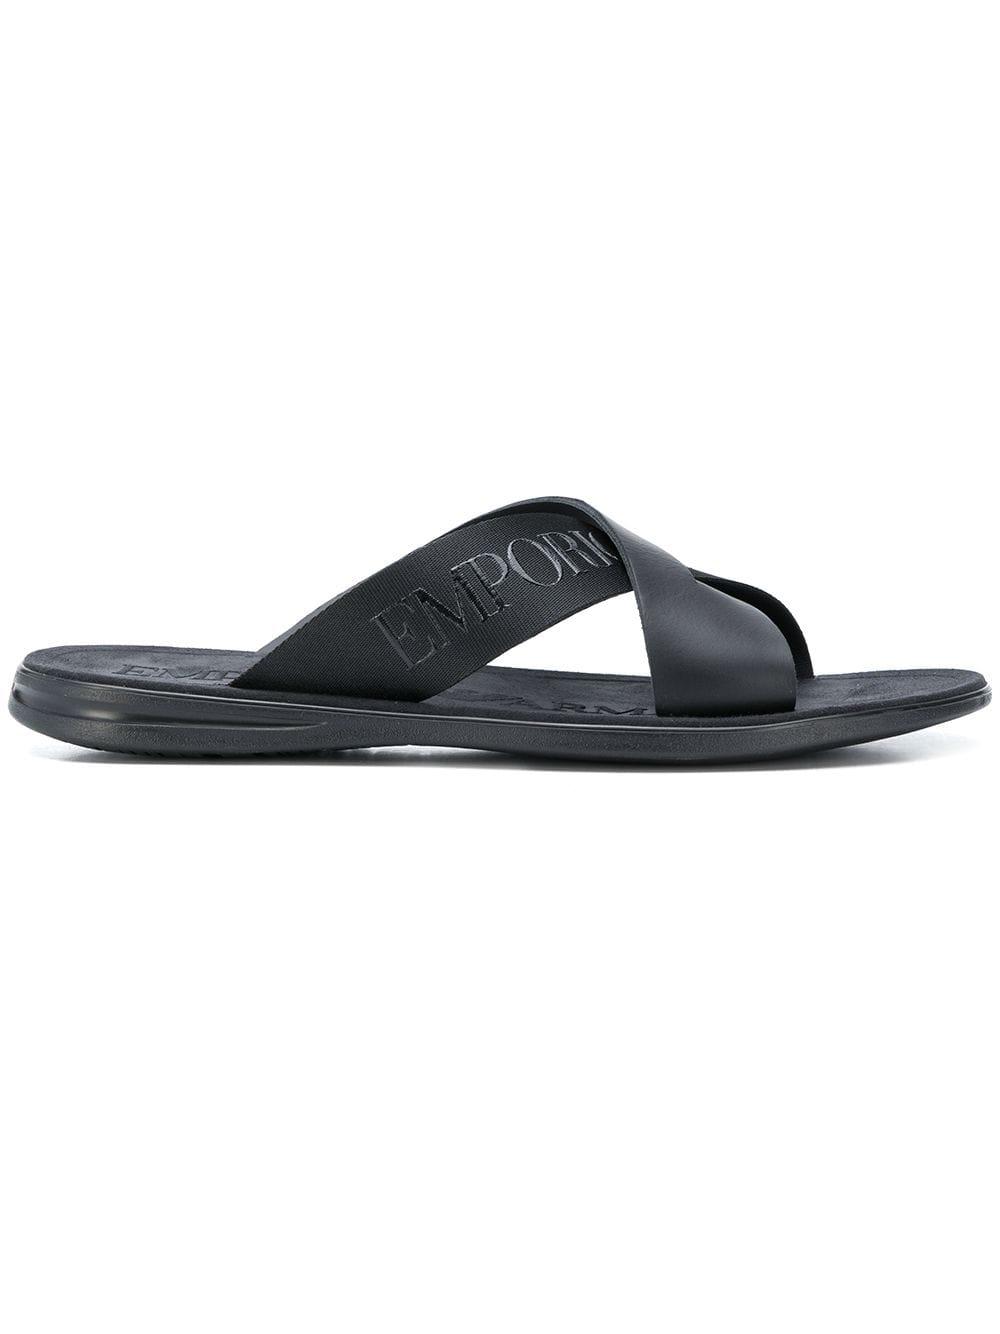 Emporio Armani Synthetic Logo Pool Slides in Black for Men - Lyst